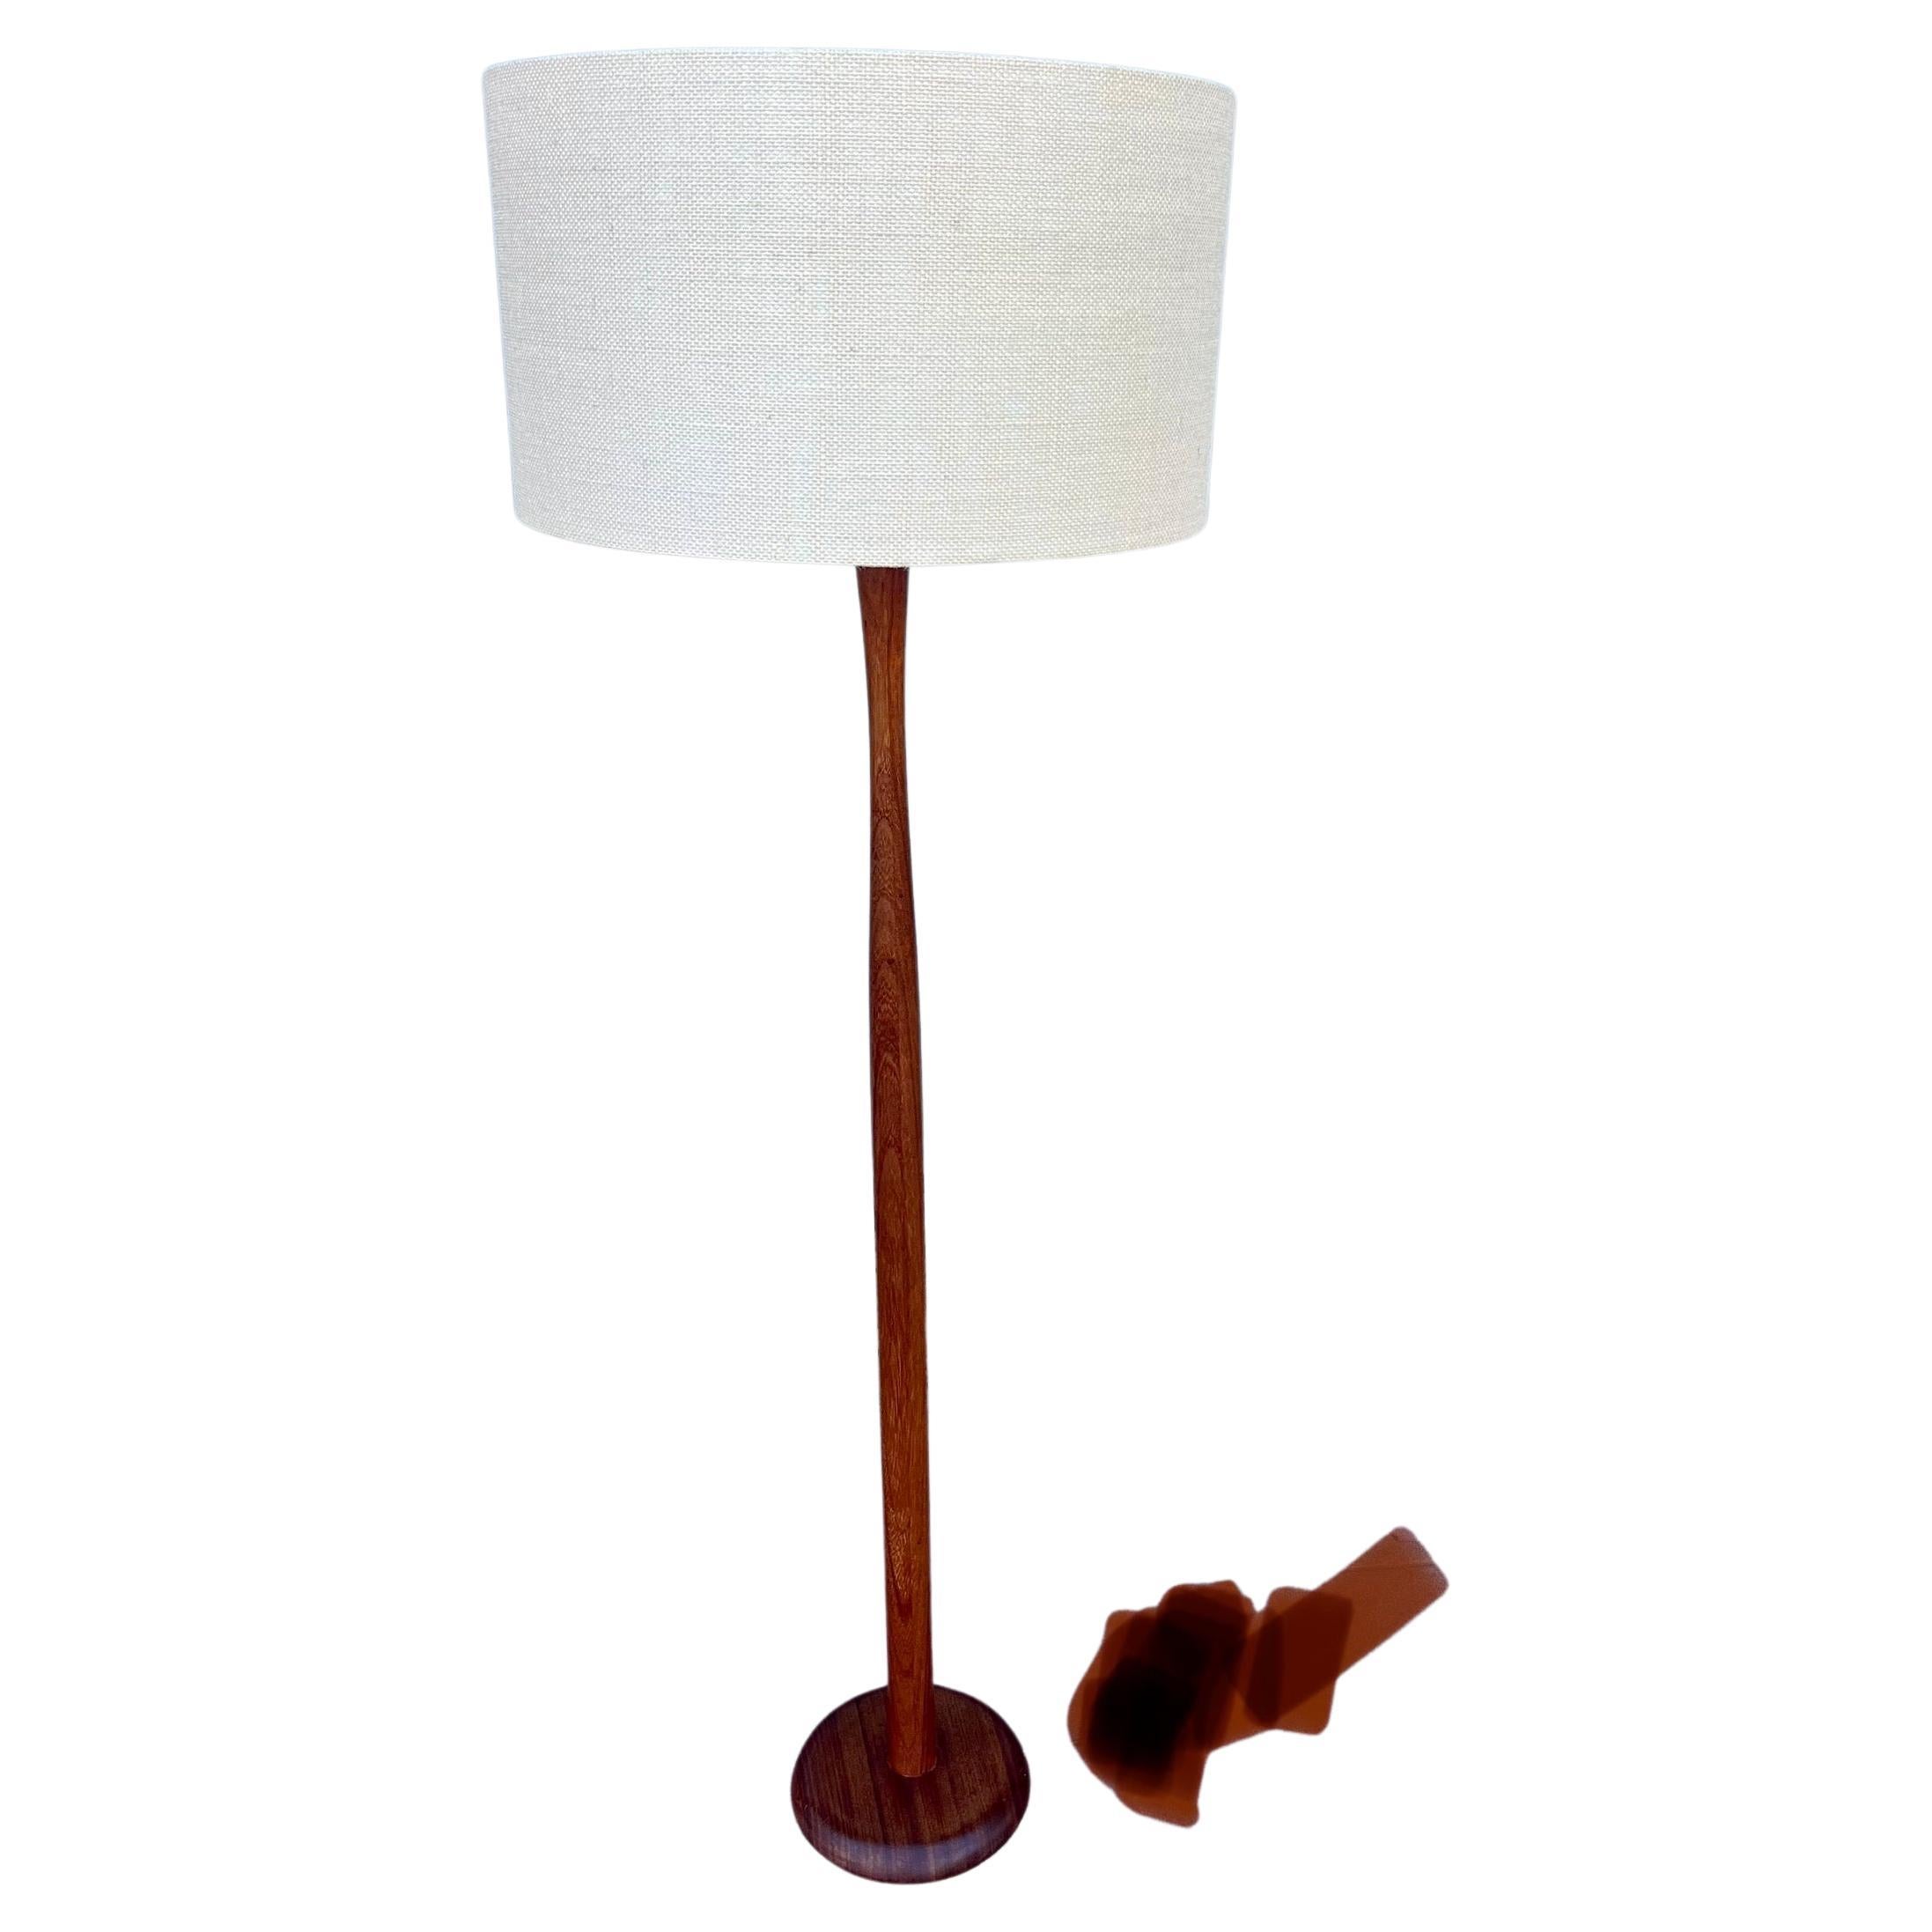 Simple elegant solid teak floor lamp, rewired, lampshade not included, its the original some wear due to age. 57